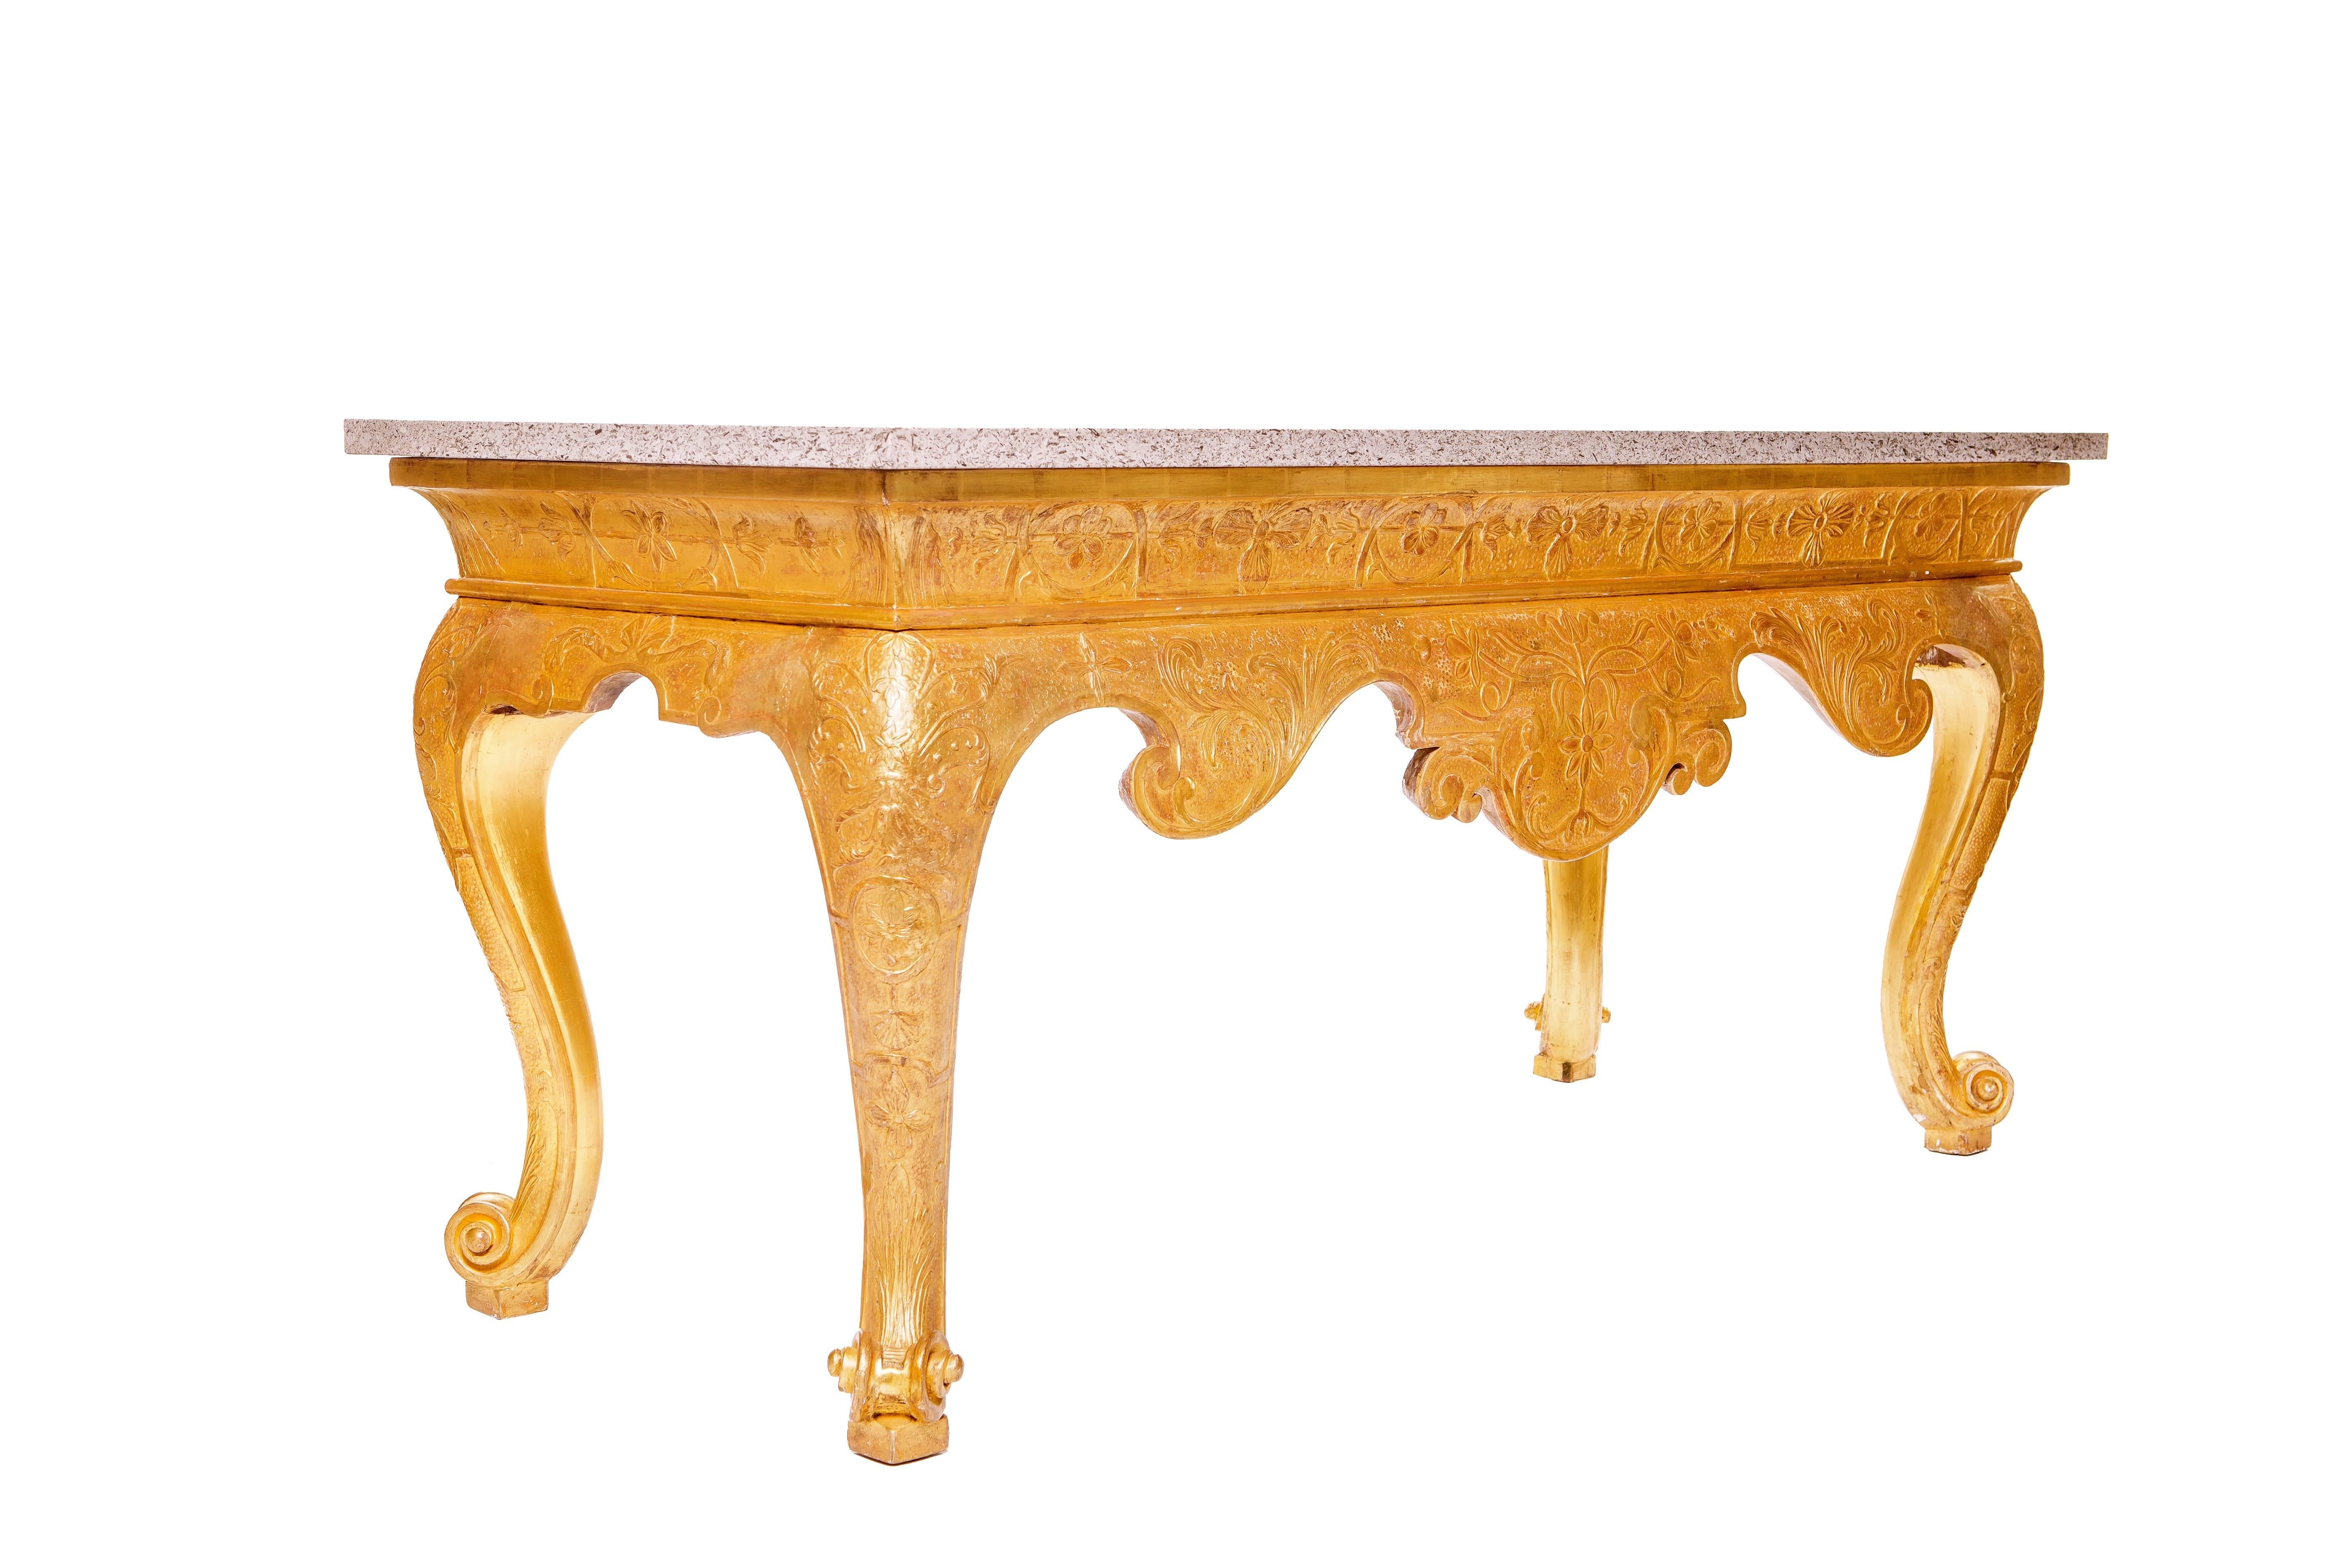 A fine early 18th century English Georgian gilt gesso strap work console of large portions, with a marble top, the base with elaborate raised floral strap work and deeply scalloped apron, supported by cabriole legs with scrolled feet.